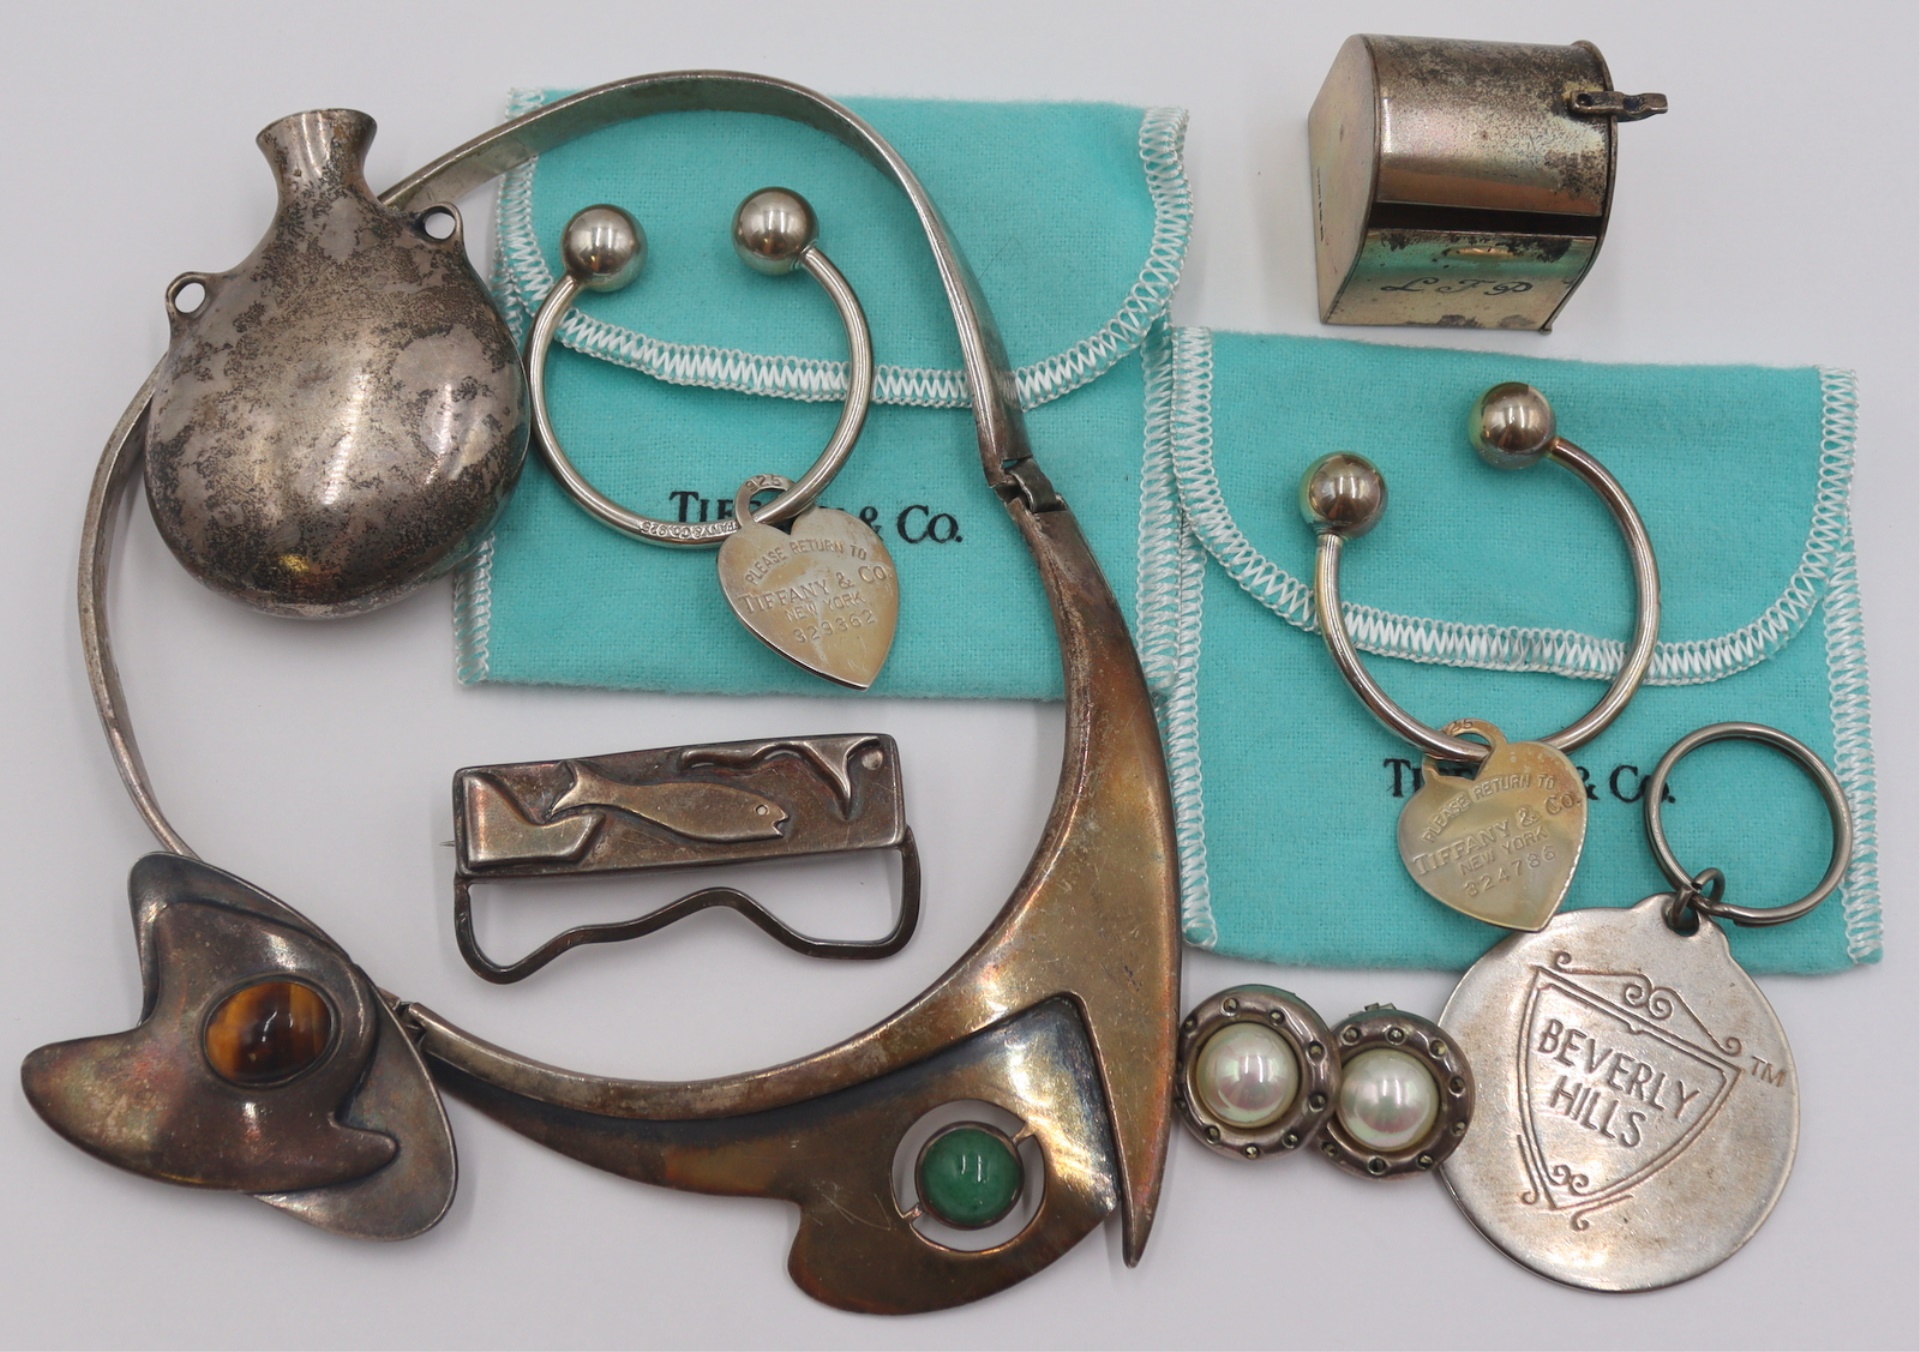 JEWELRY. SILVER JEWELRY AND OBJECTS